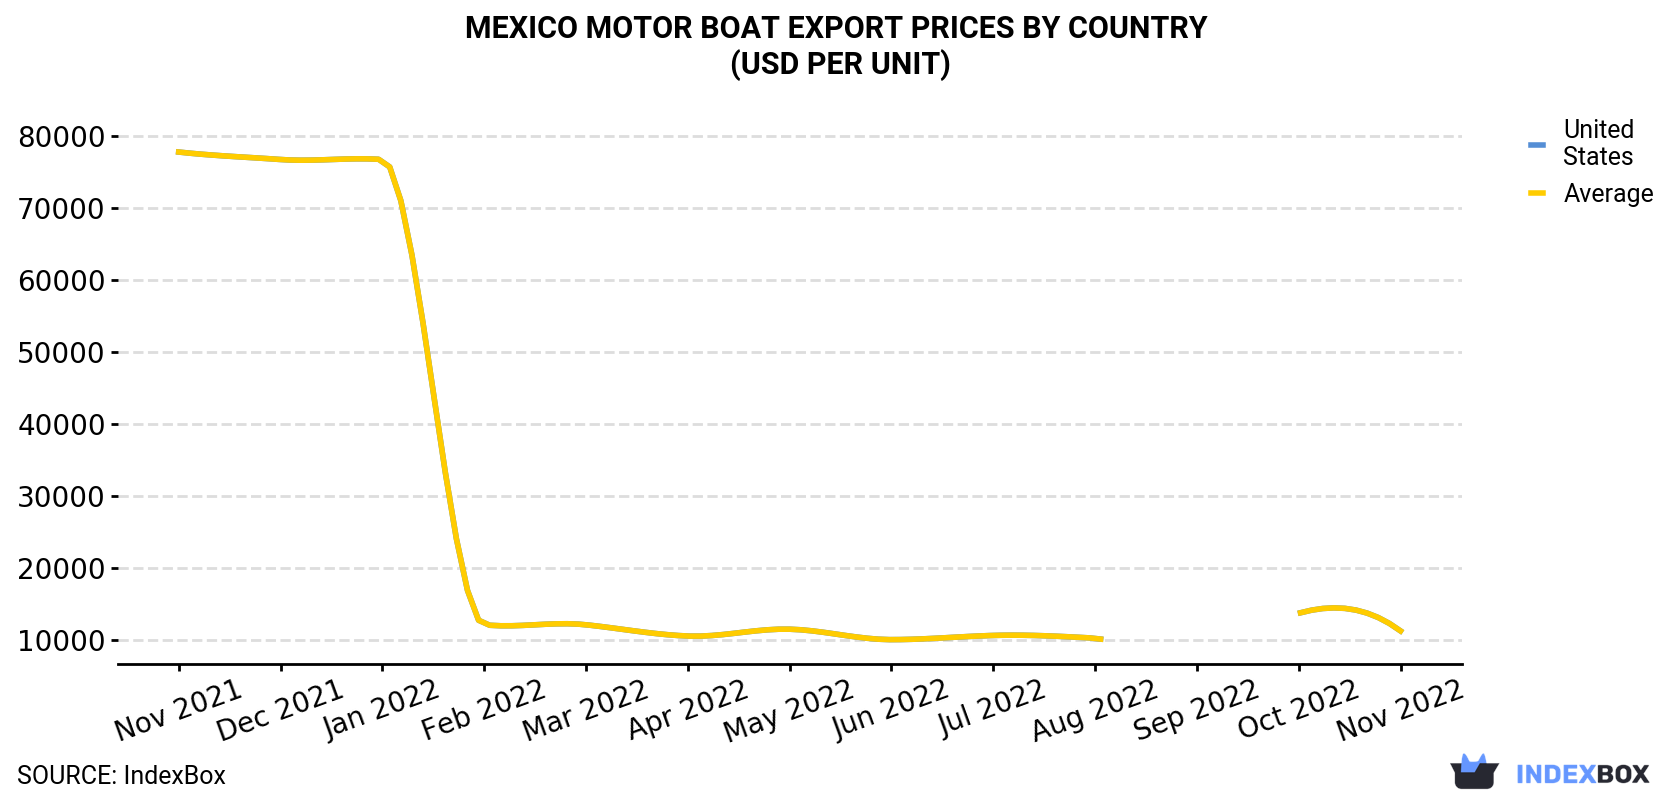 Mexico Motor Boat Export Prices By Country (USD Per Unit)